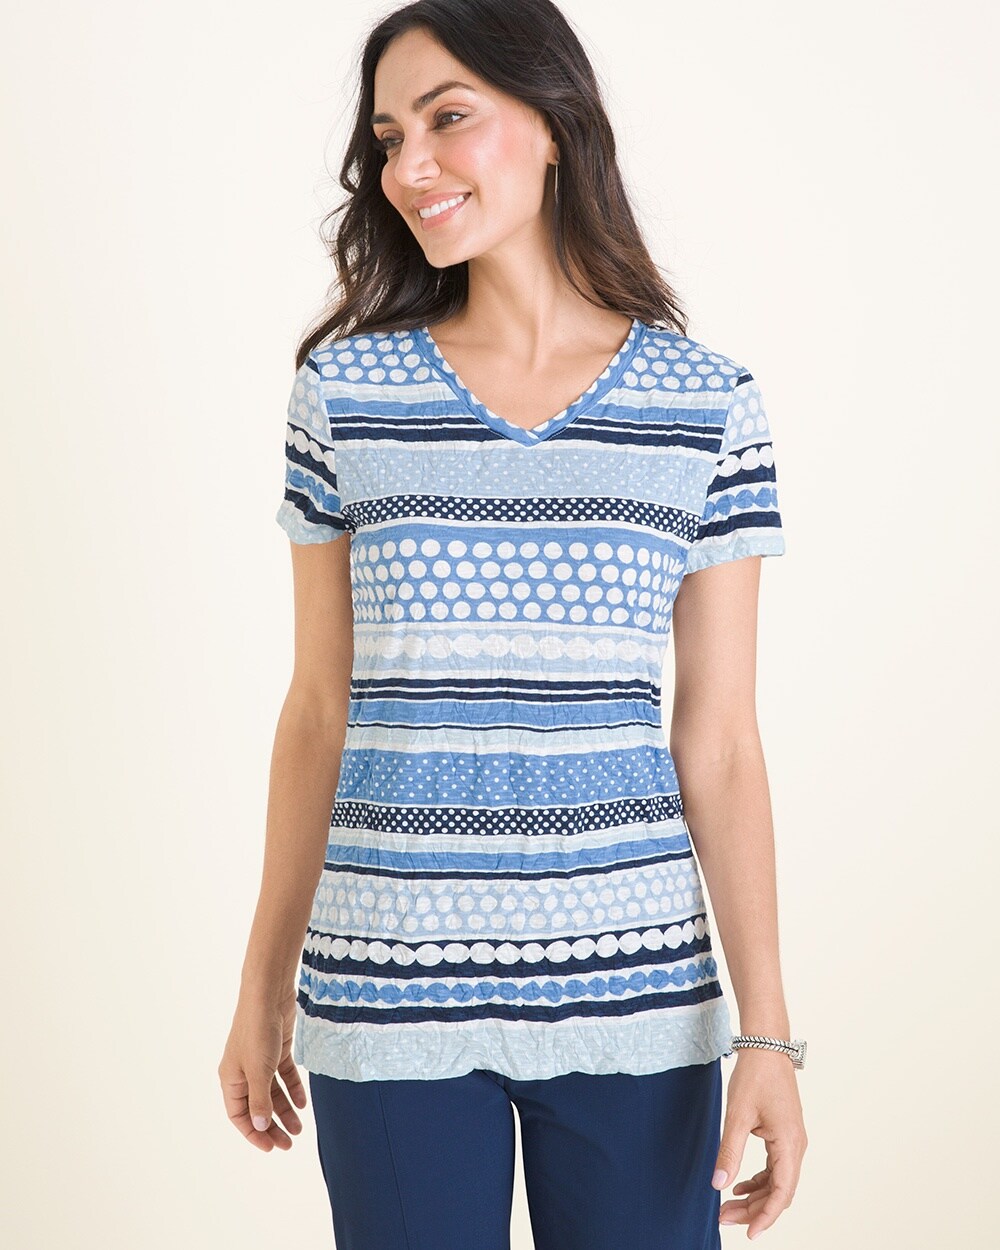 Zenergy Crushed Striped-Dot Top